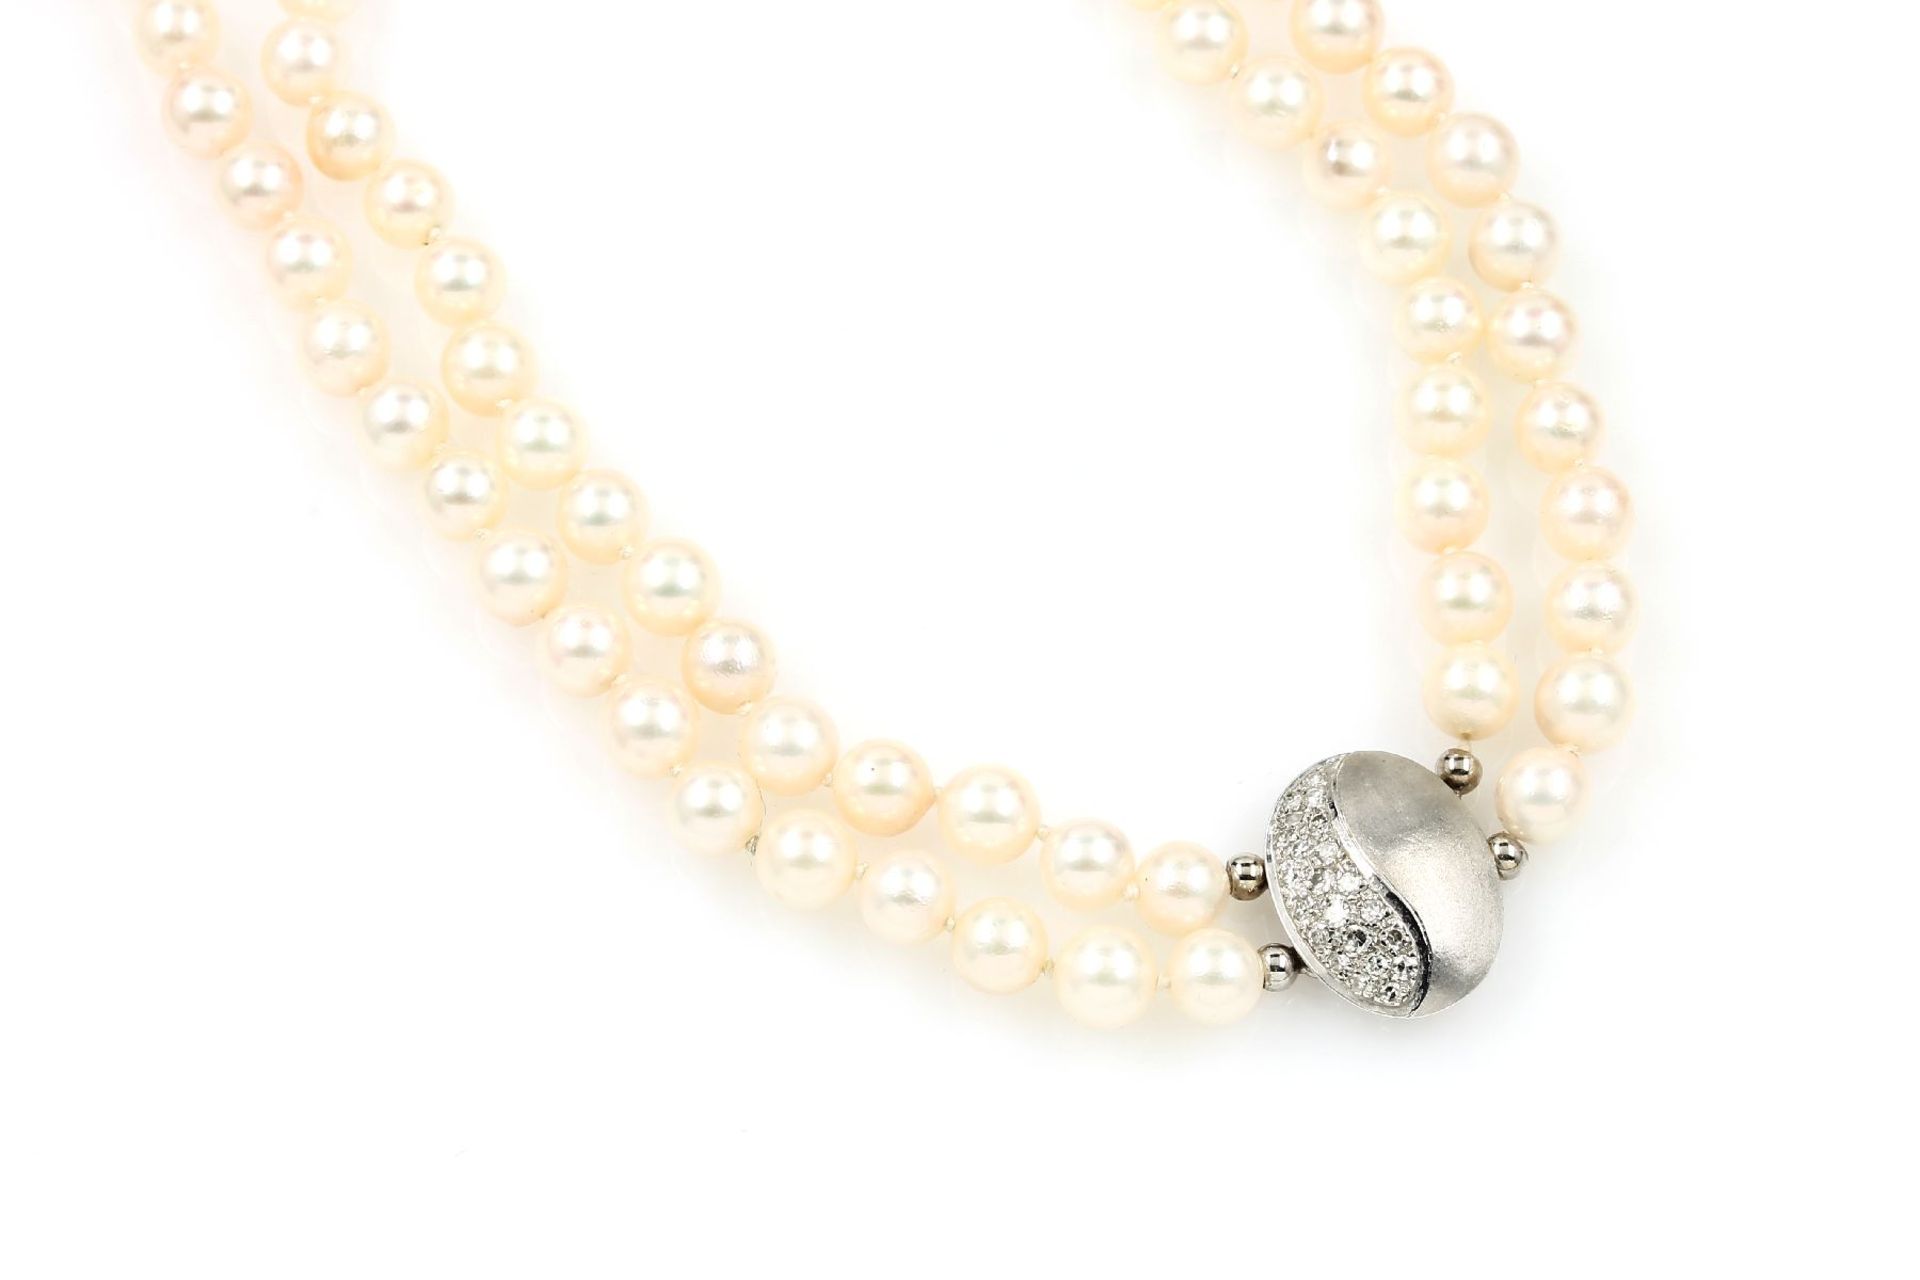 2-rowed necklace made of cultured akoya pearls , 168 white pearls diam. approx. 6.0 - 6.5 mm, nat.